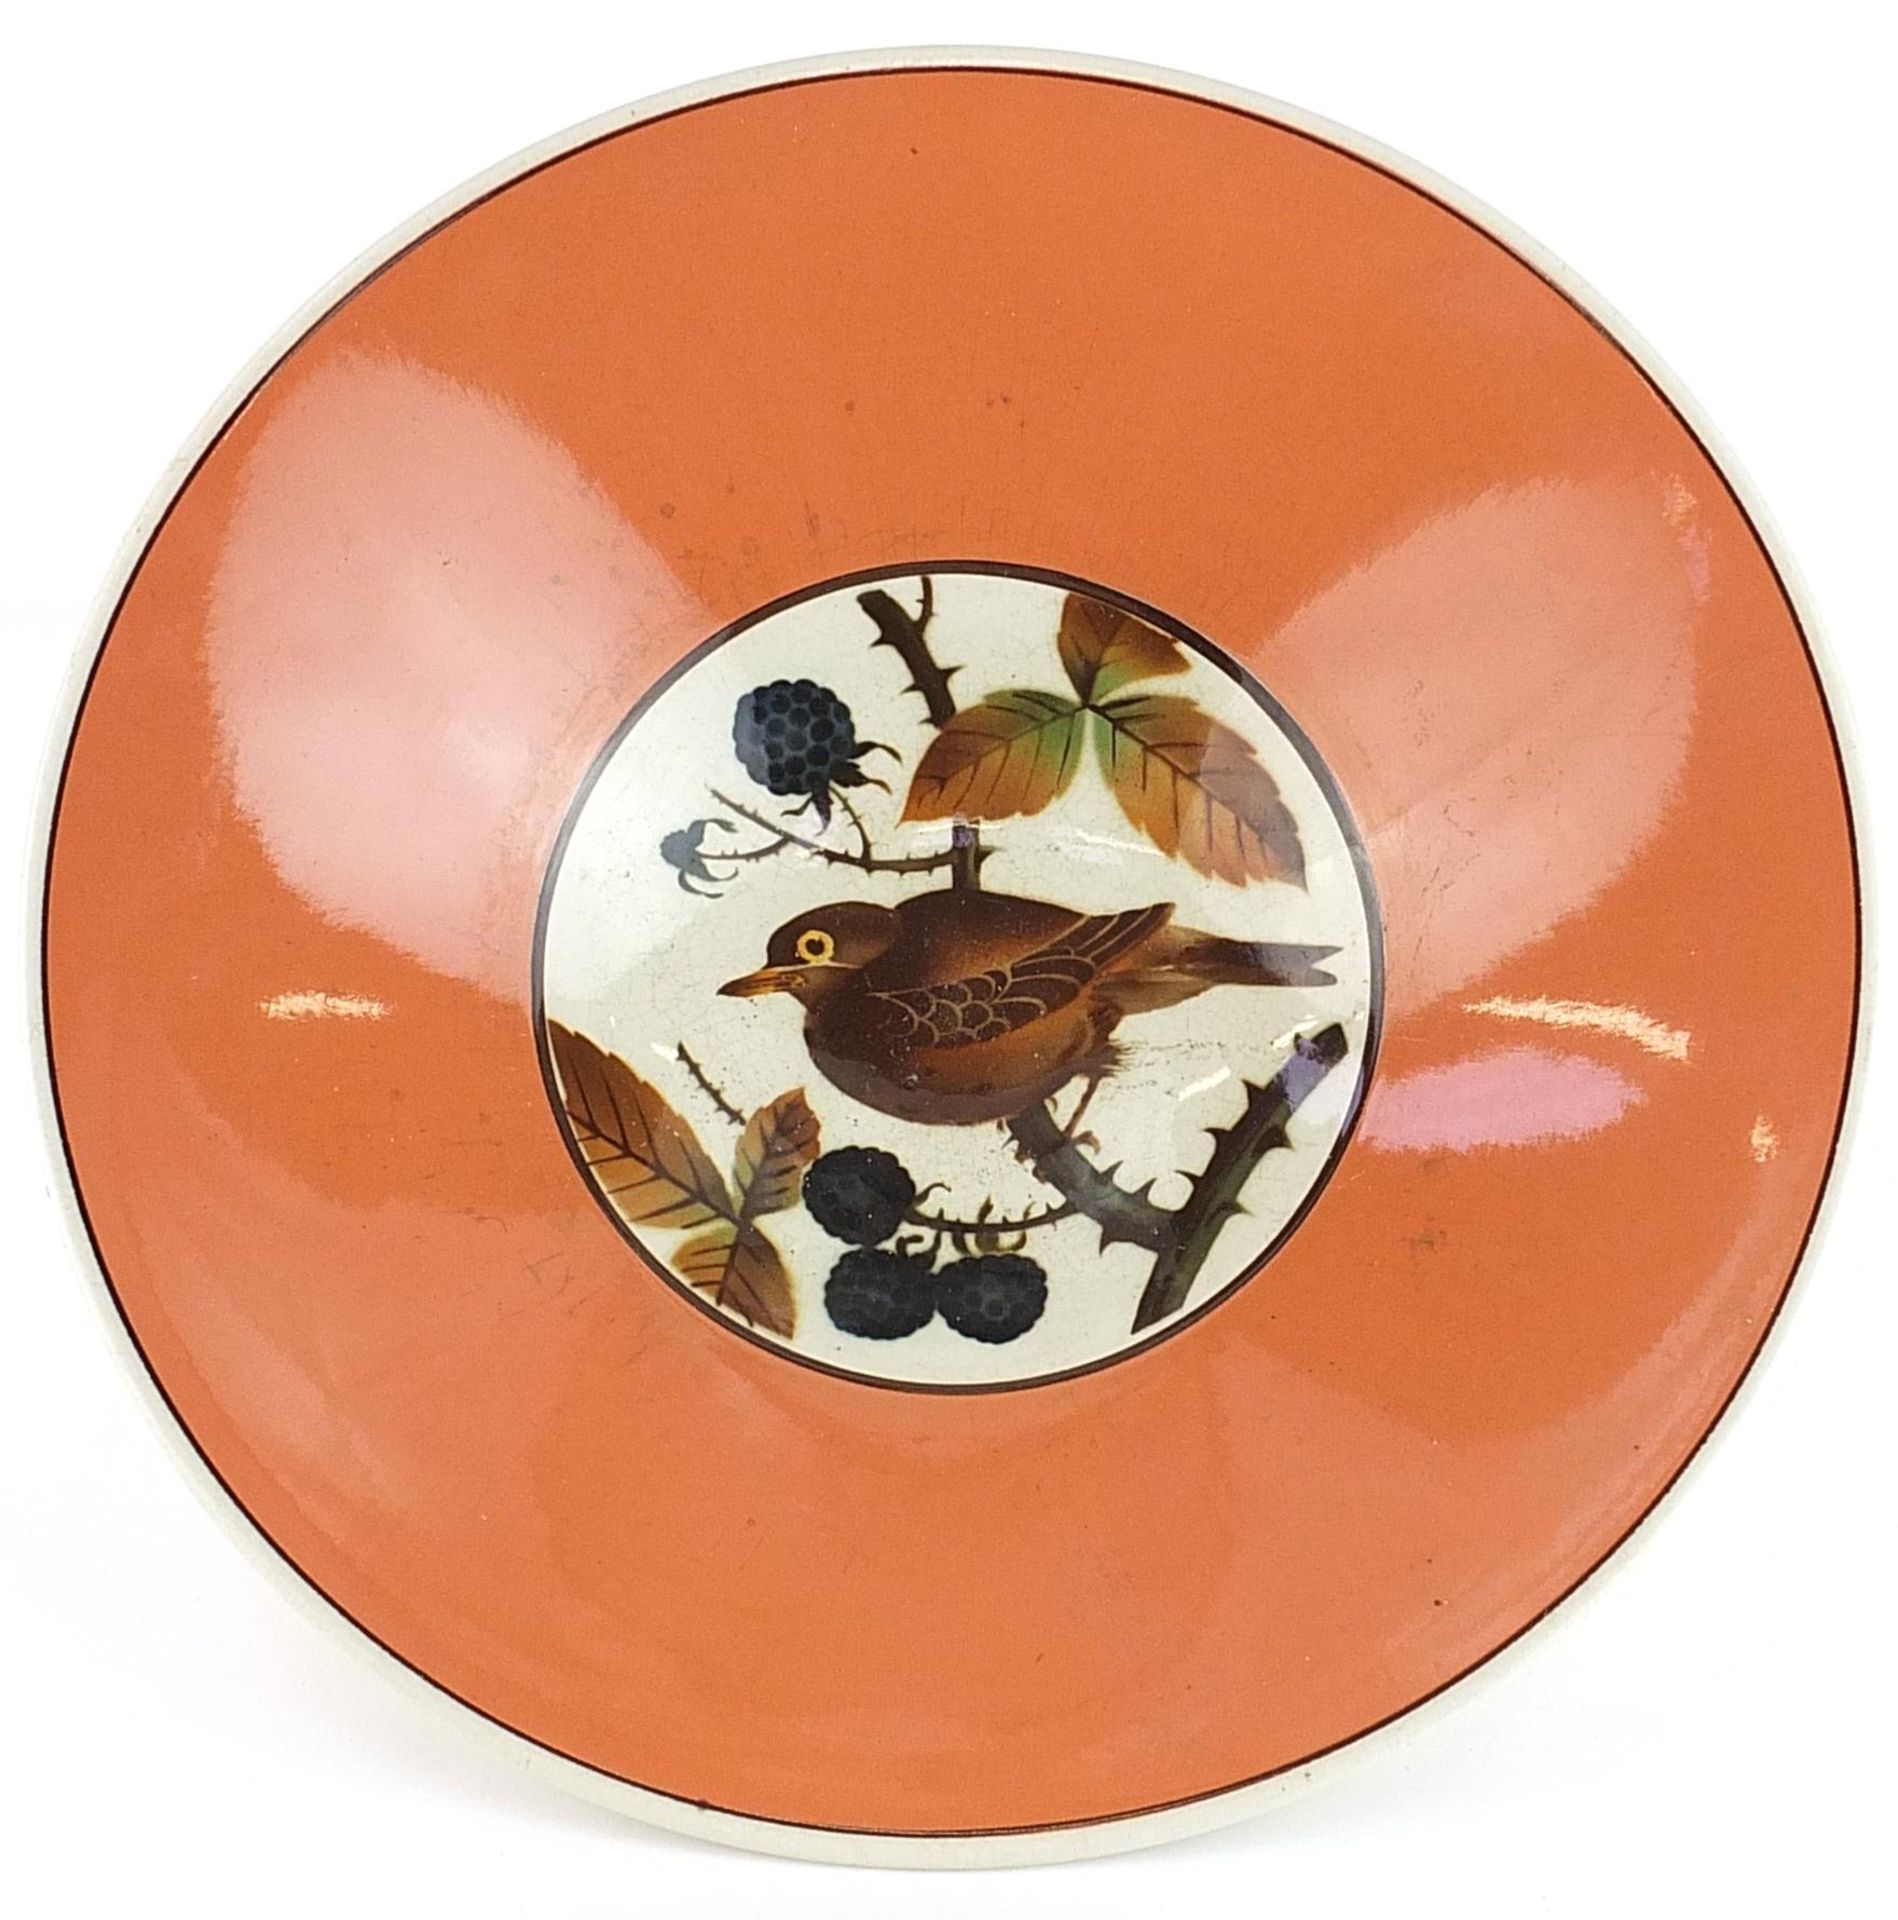 Gunhild, Danish porcelain centre bowl decorated with a bird and berries, 32.5cm in diameter